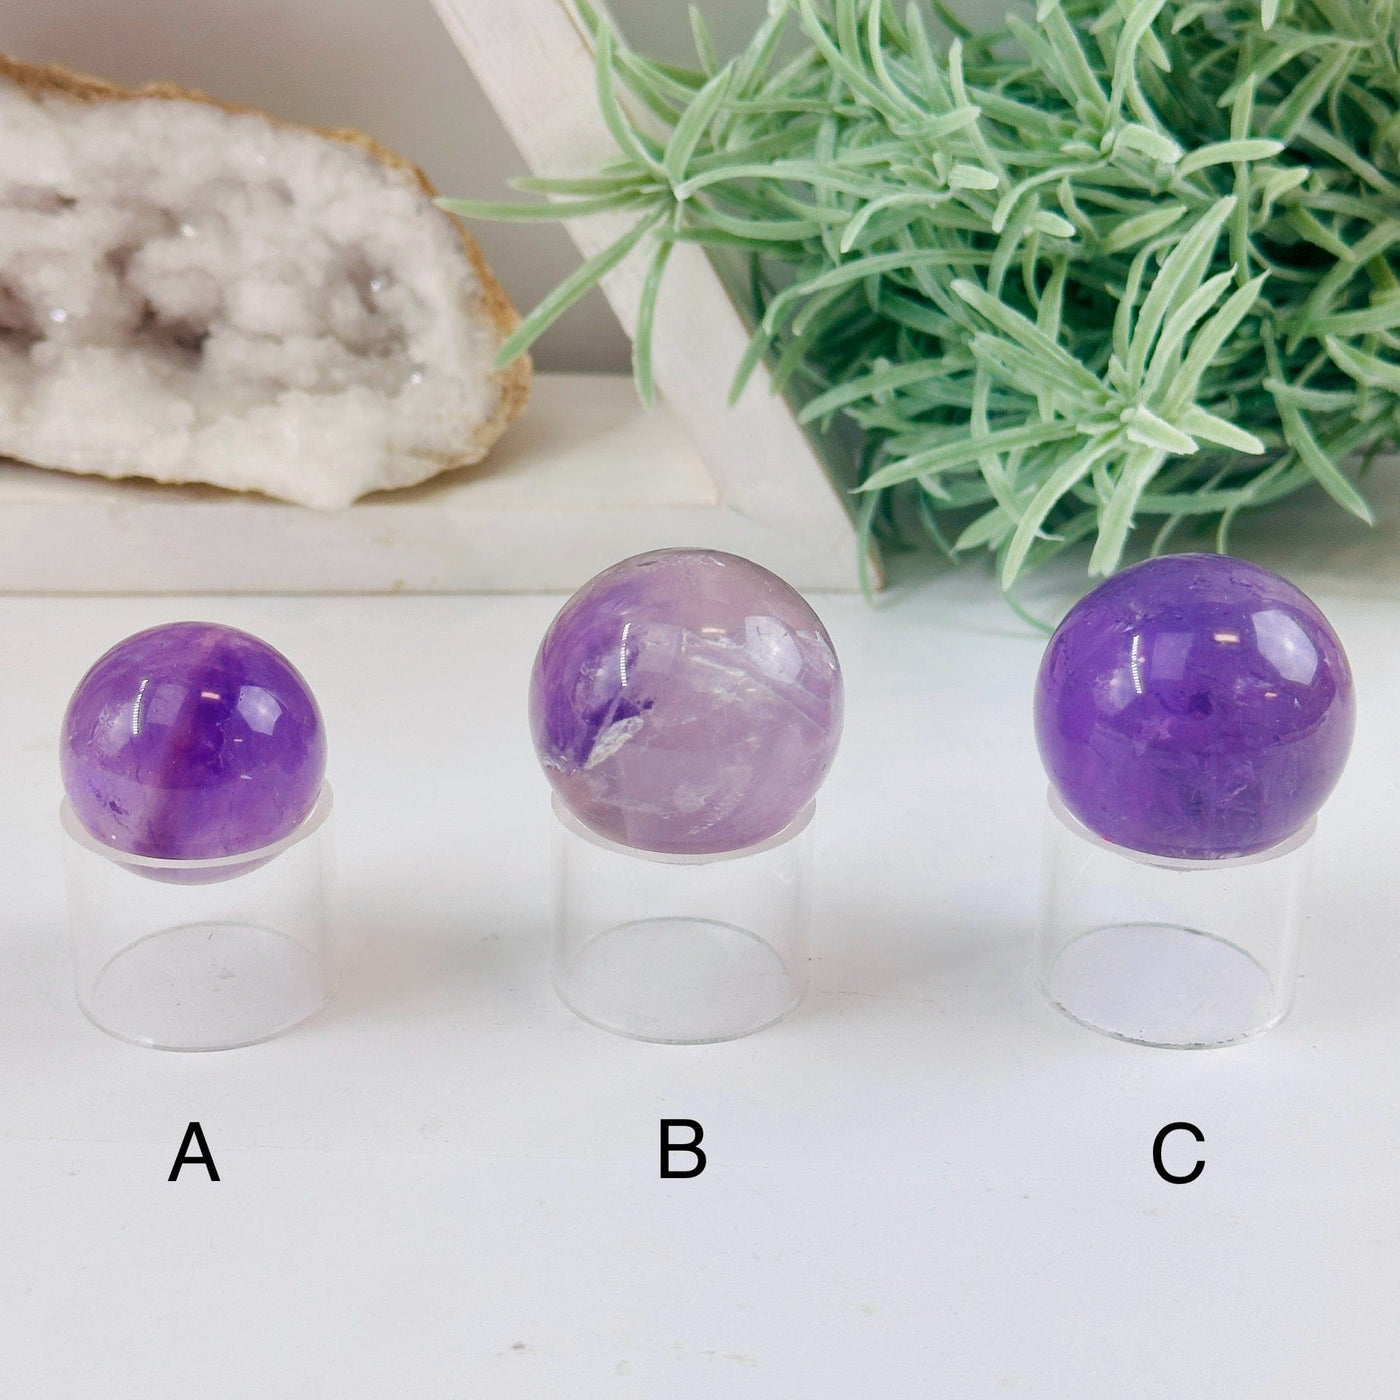 Amethyst Polished Sphere - Crystal Ball - YOU CHOOSE all 3 variants labeled A B C